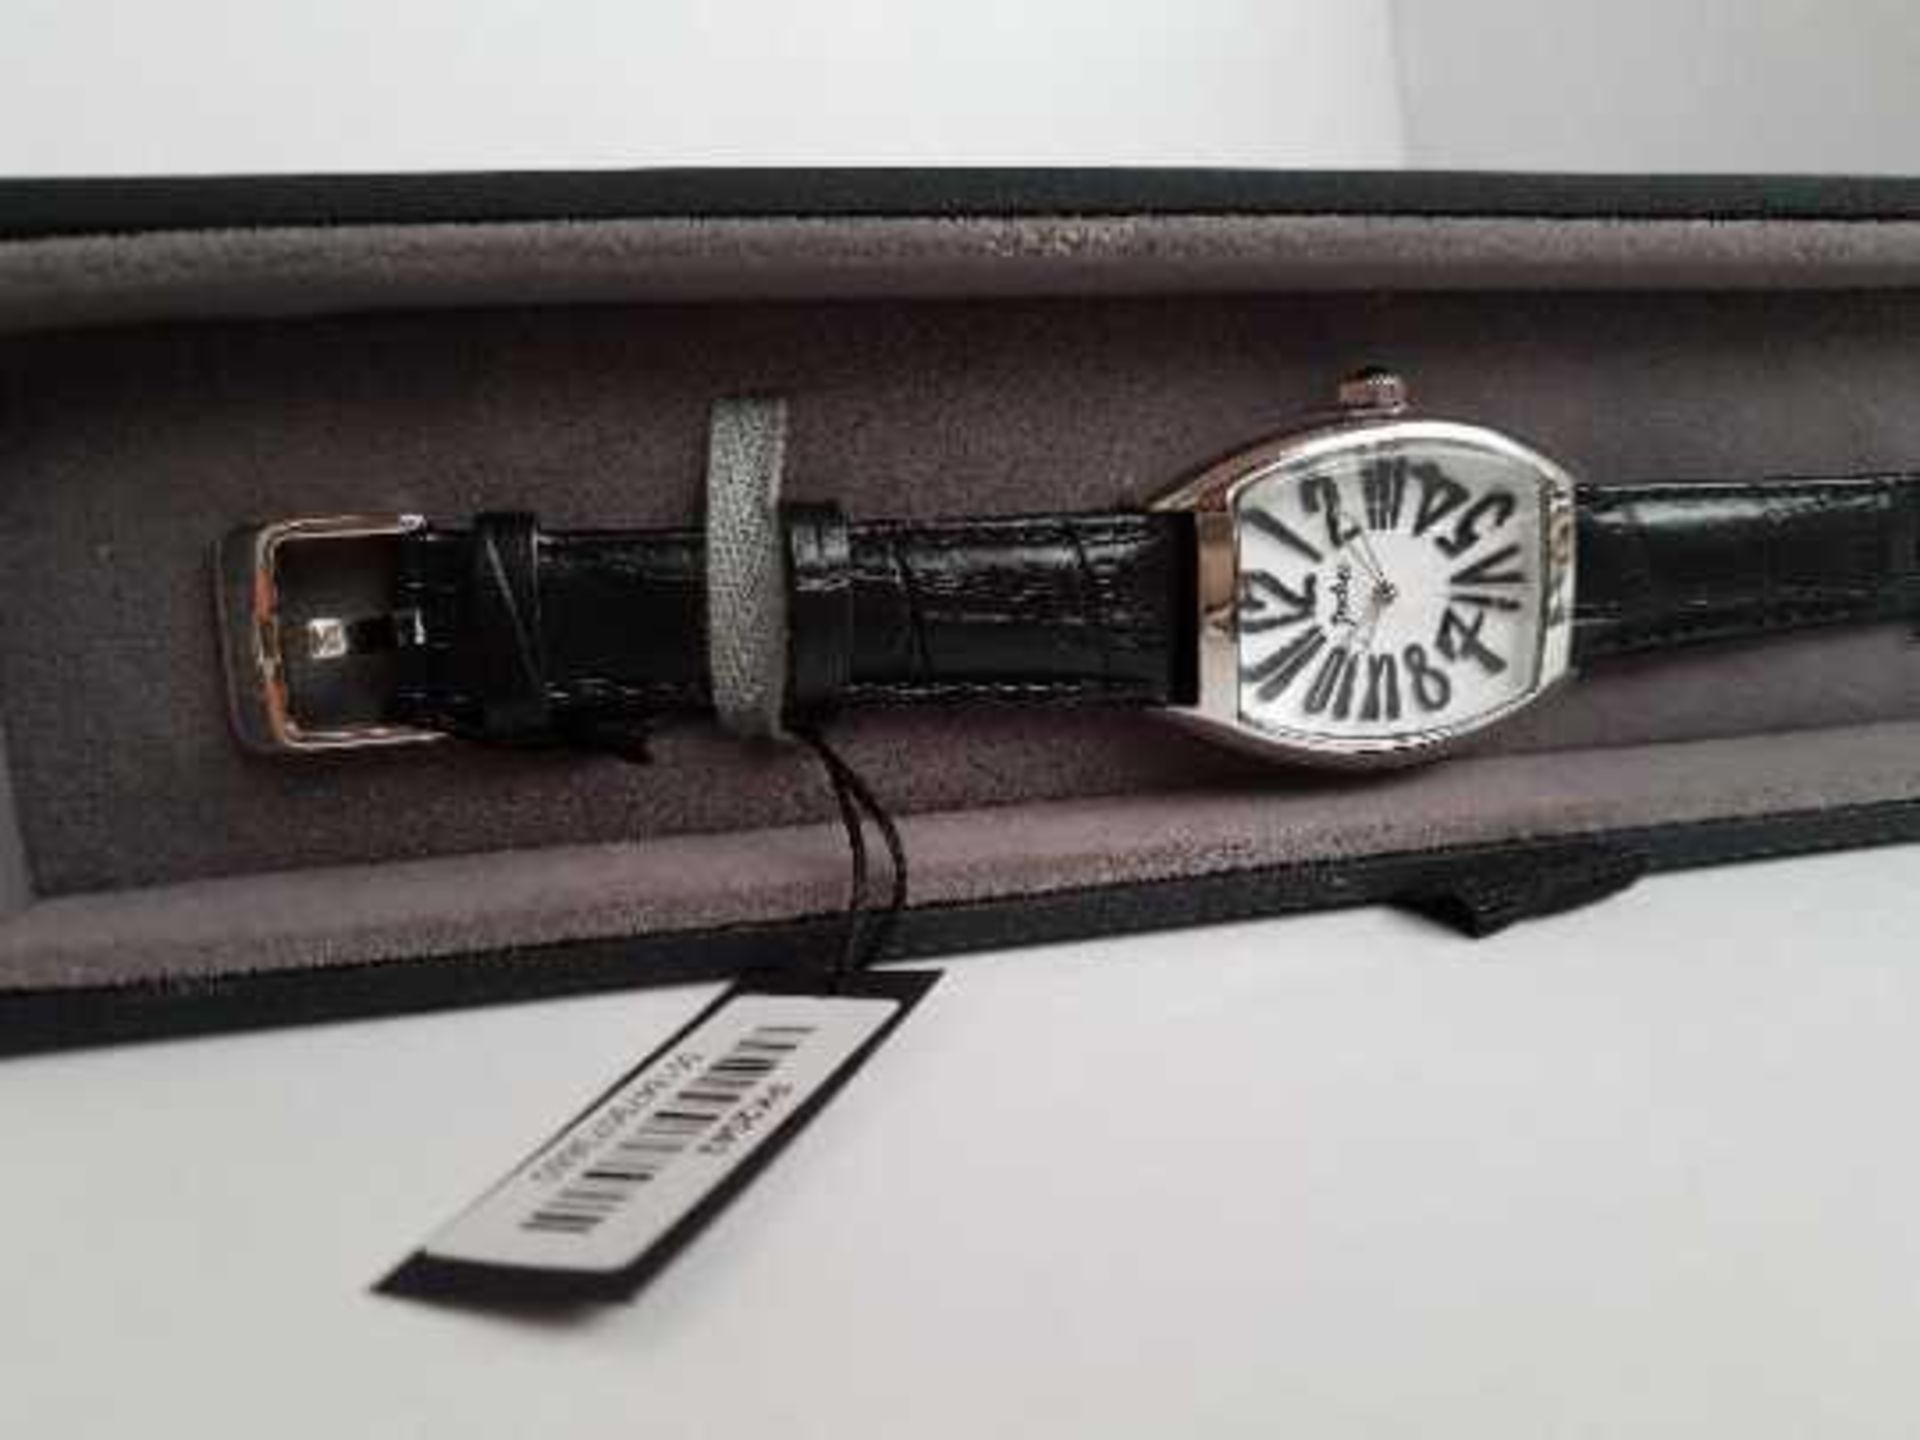 Pocket watch (PK3000) Leather strapped watch, new and Ticking in Branded case and Box with papers,